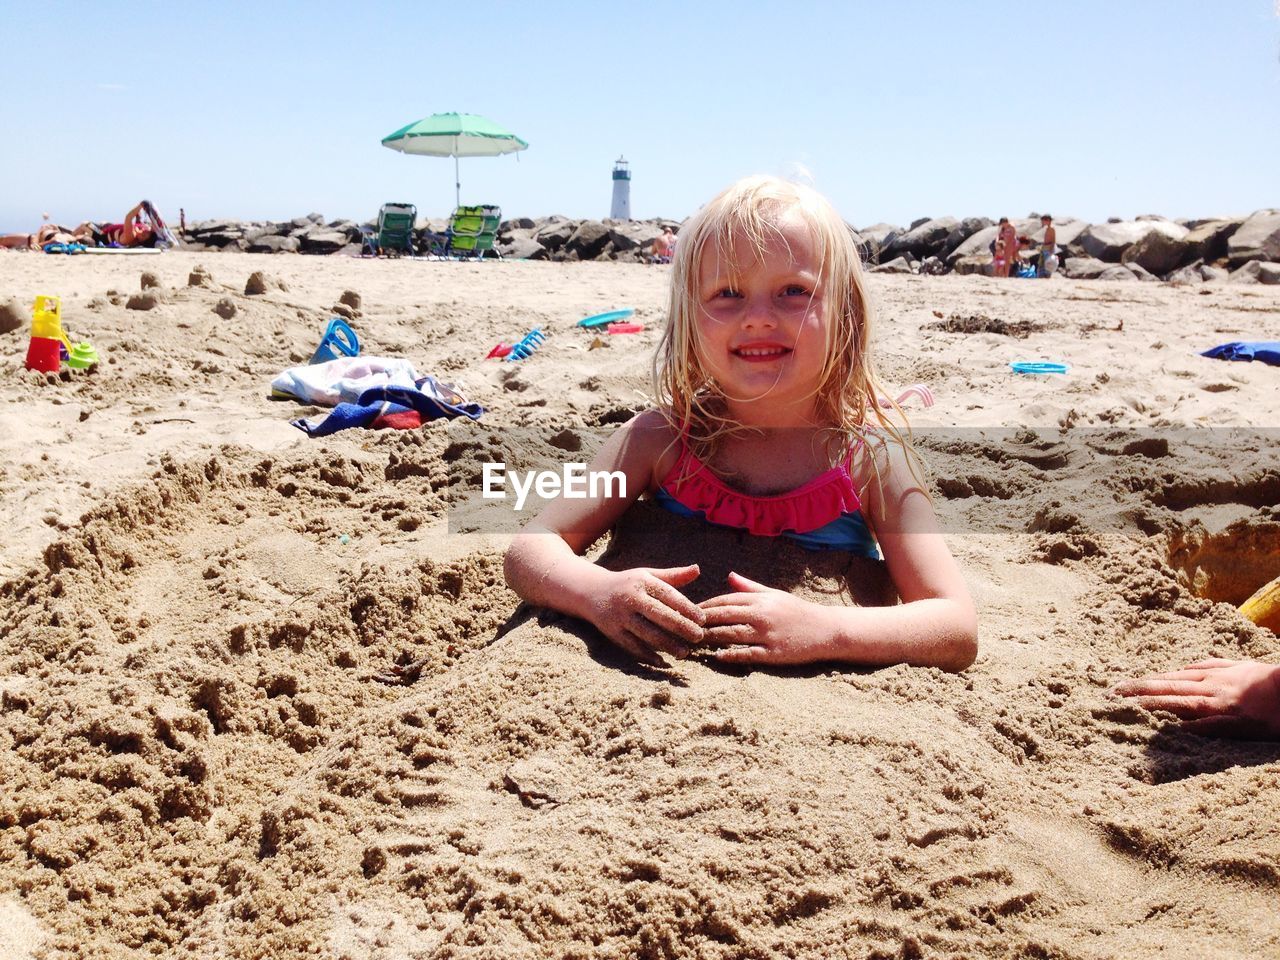 Cute smiling girl buried in sand at beach during summer